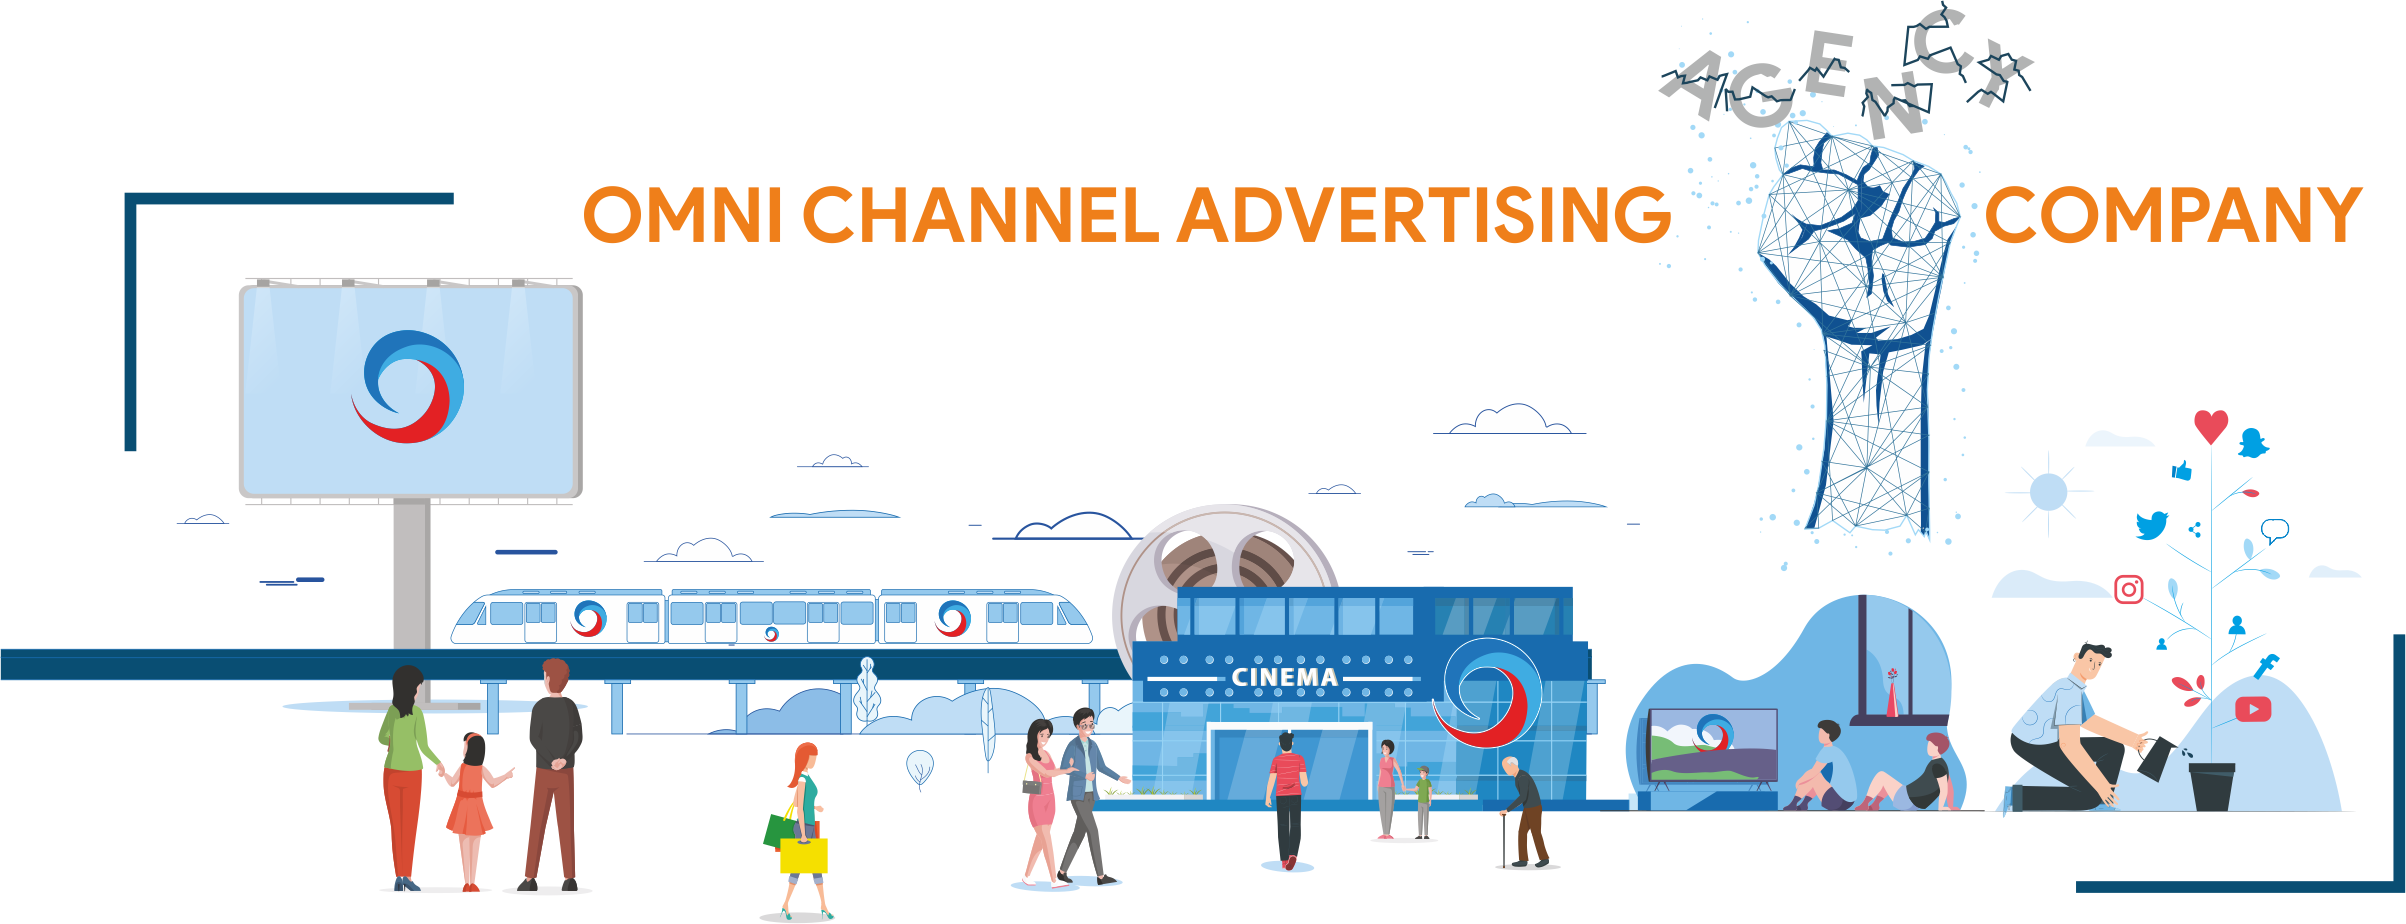 lotus-media-services-omni-channel-advertising-company